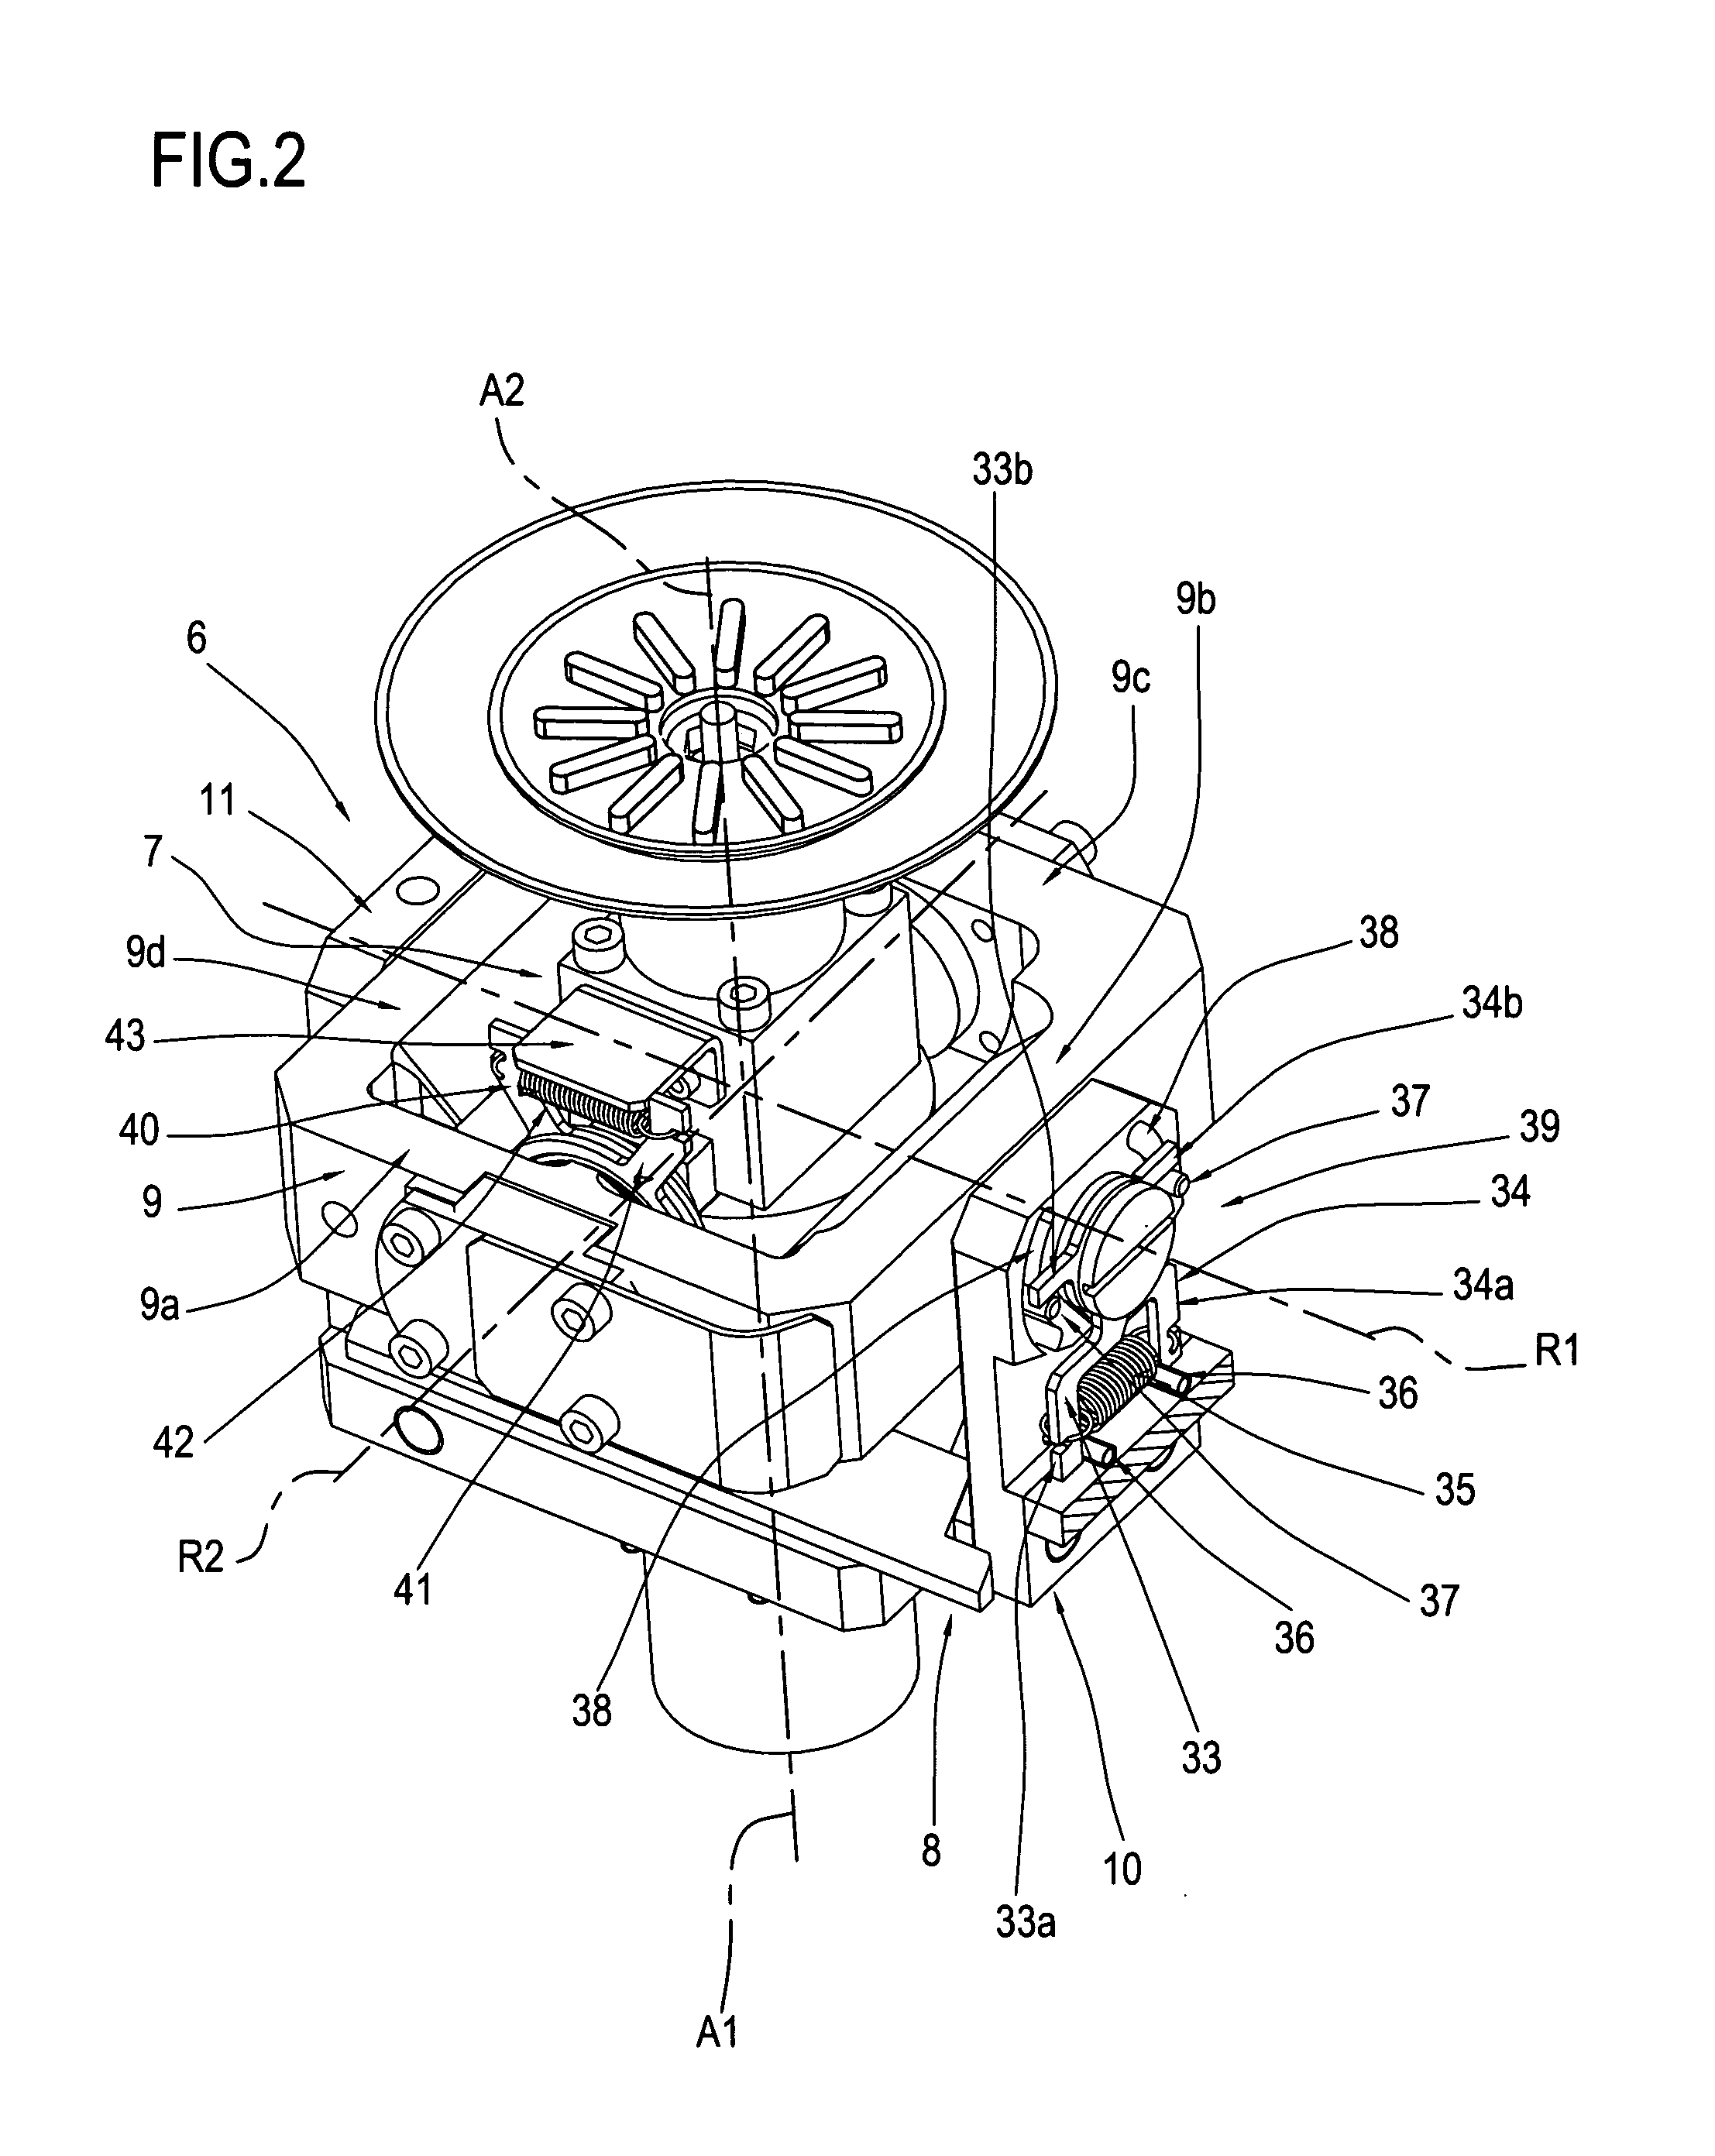 Support device for securing workpieces